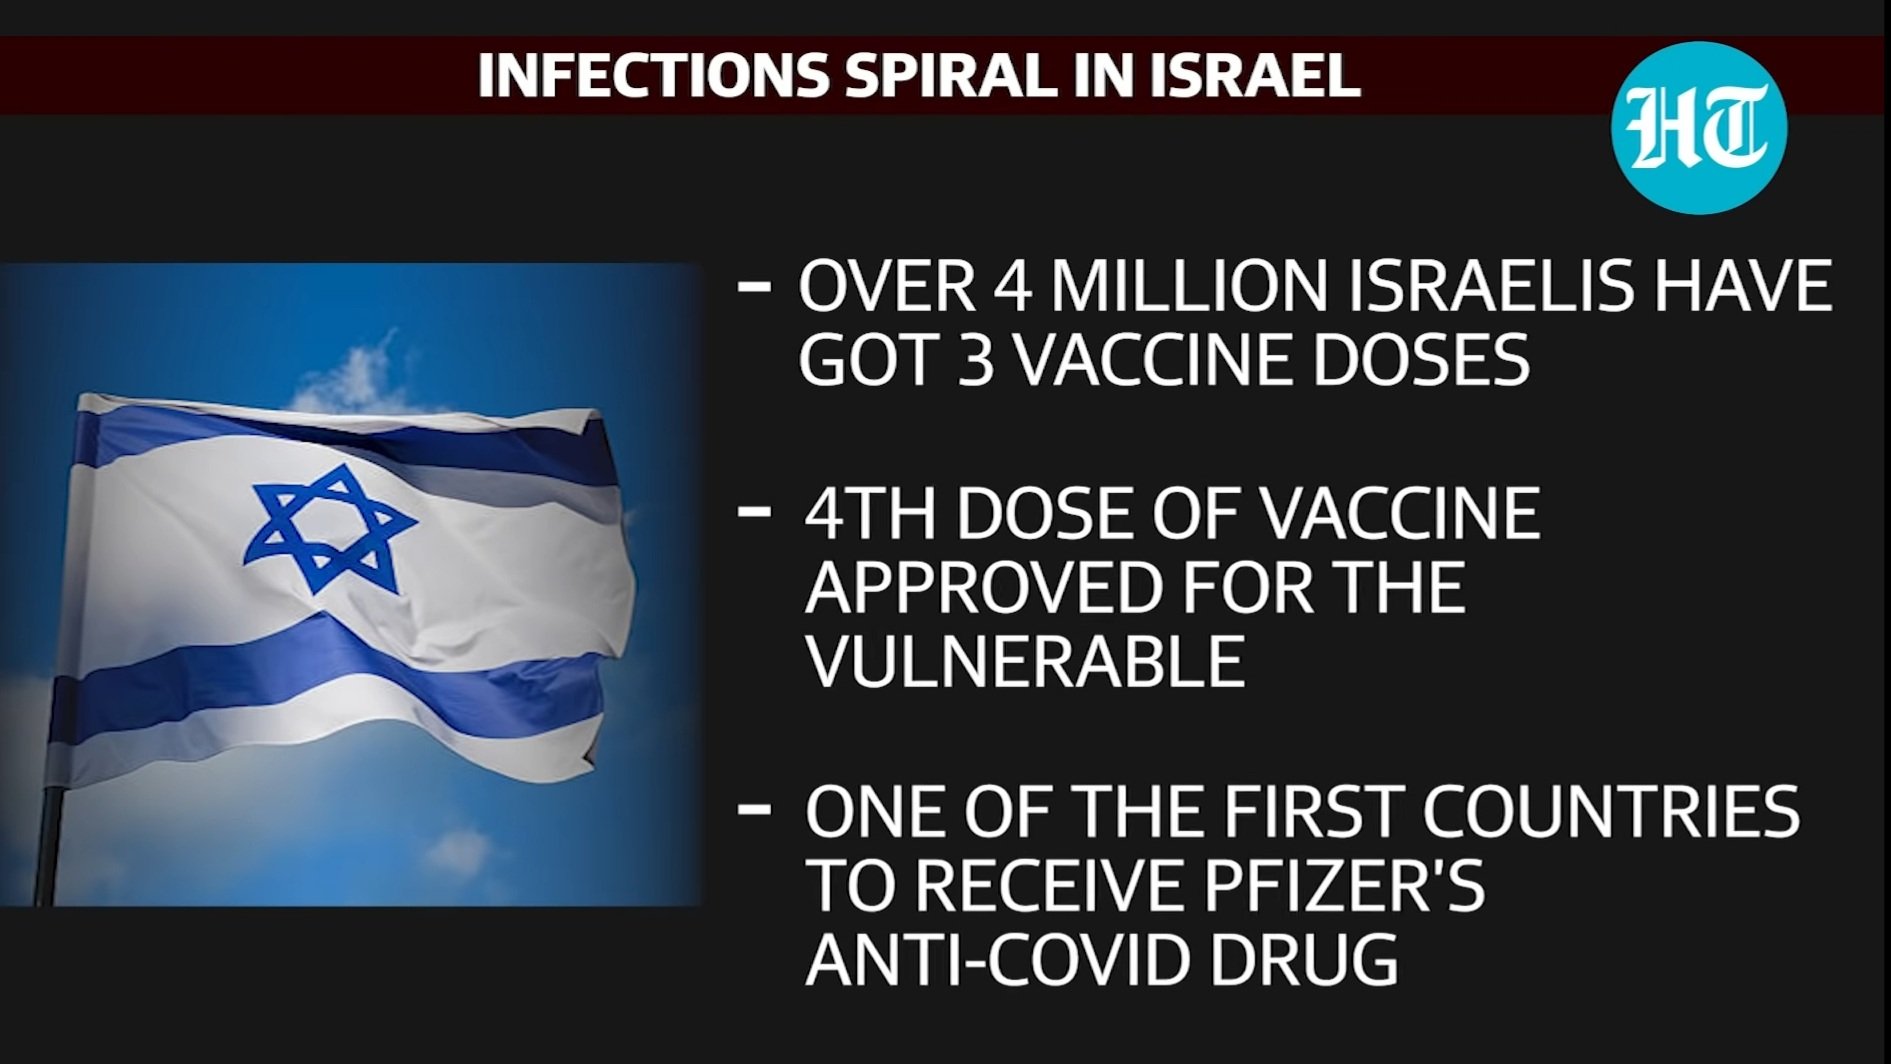 First Case of “FluRona” Detected in Almost-Fully Vaxxed Israel, Virus is Supposedly a Hybrid Flu-Coronavirus – Here We Go Again